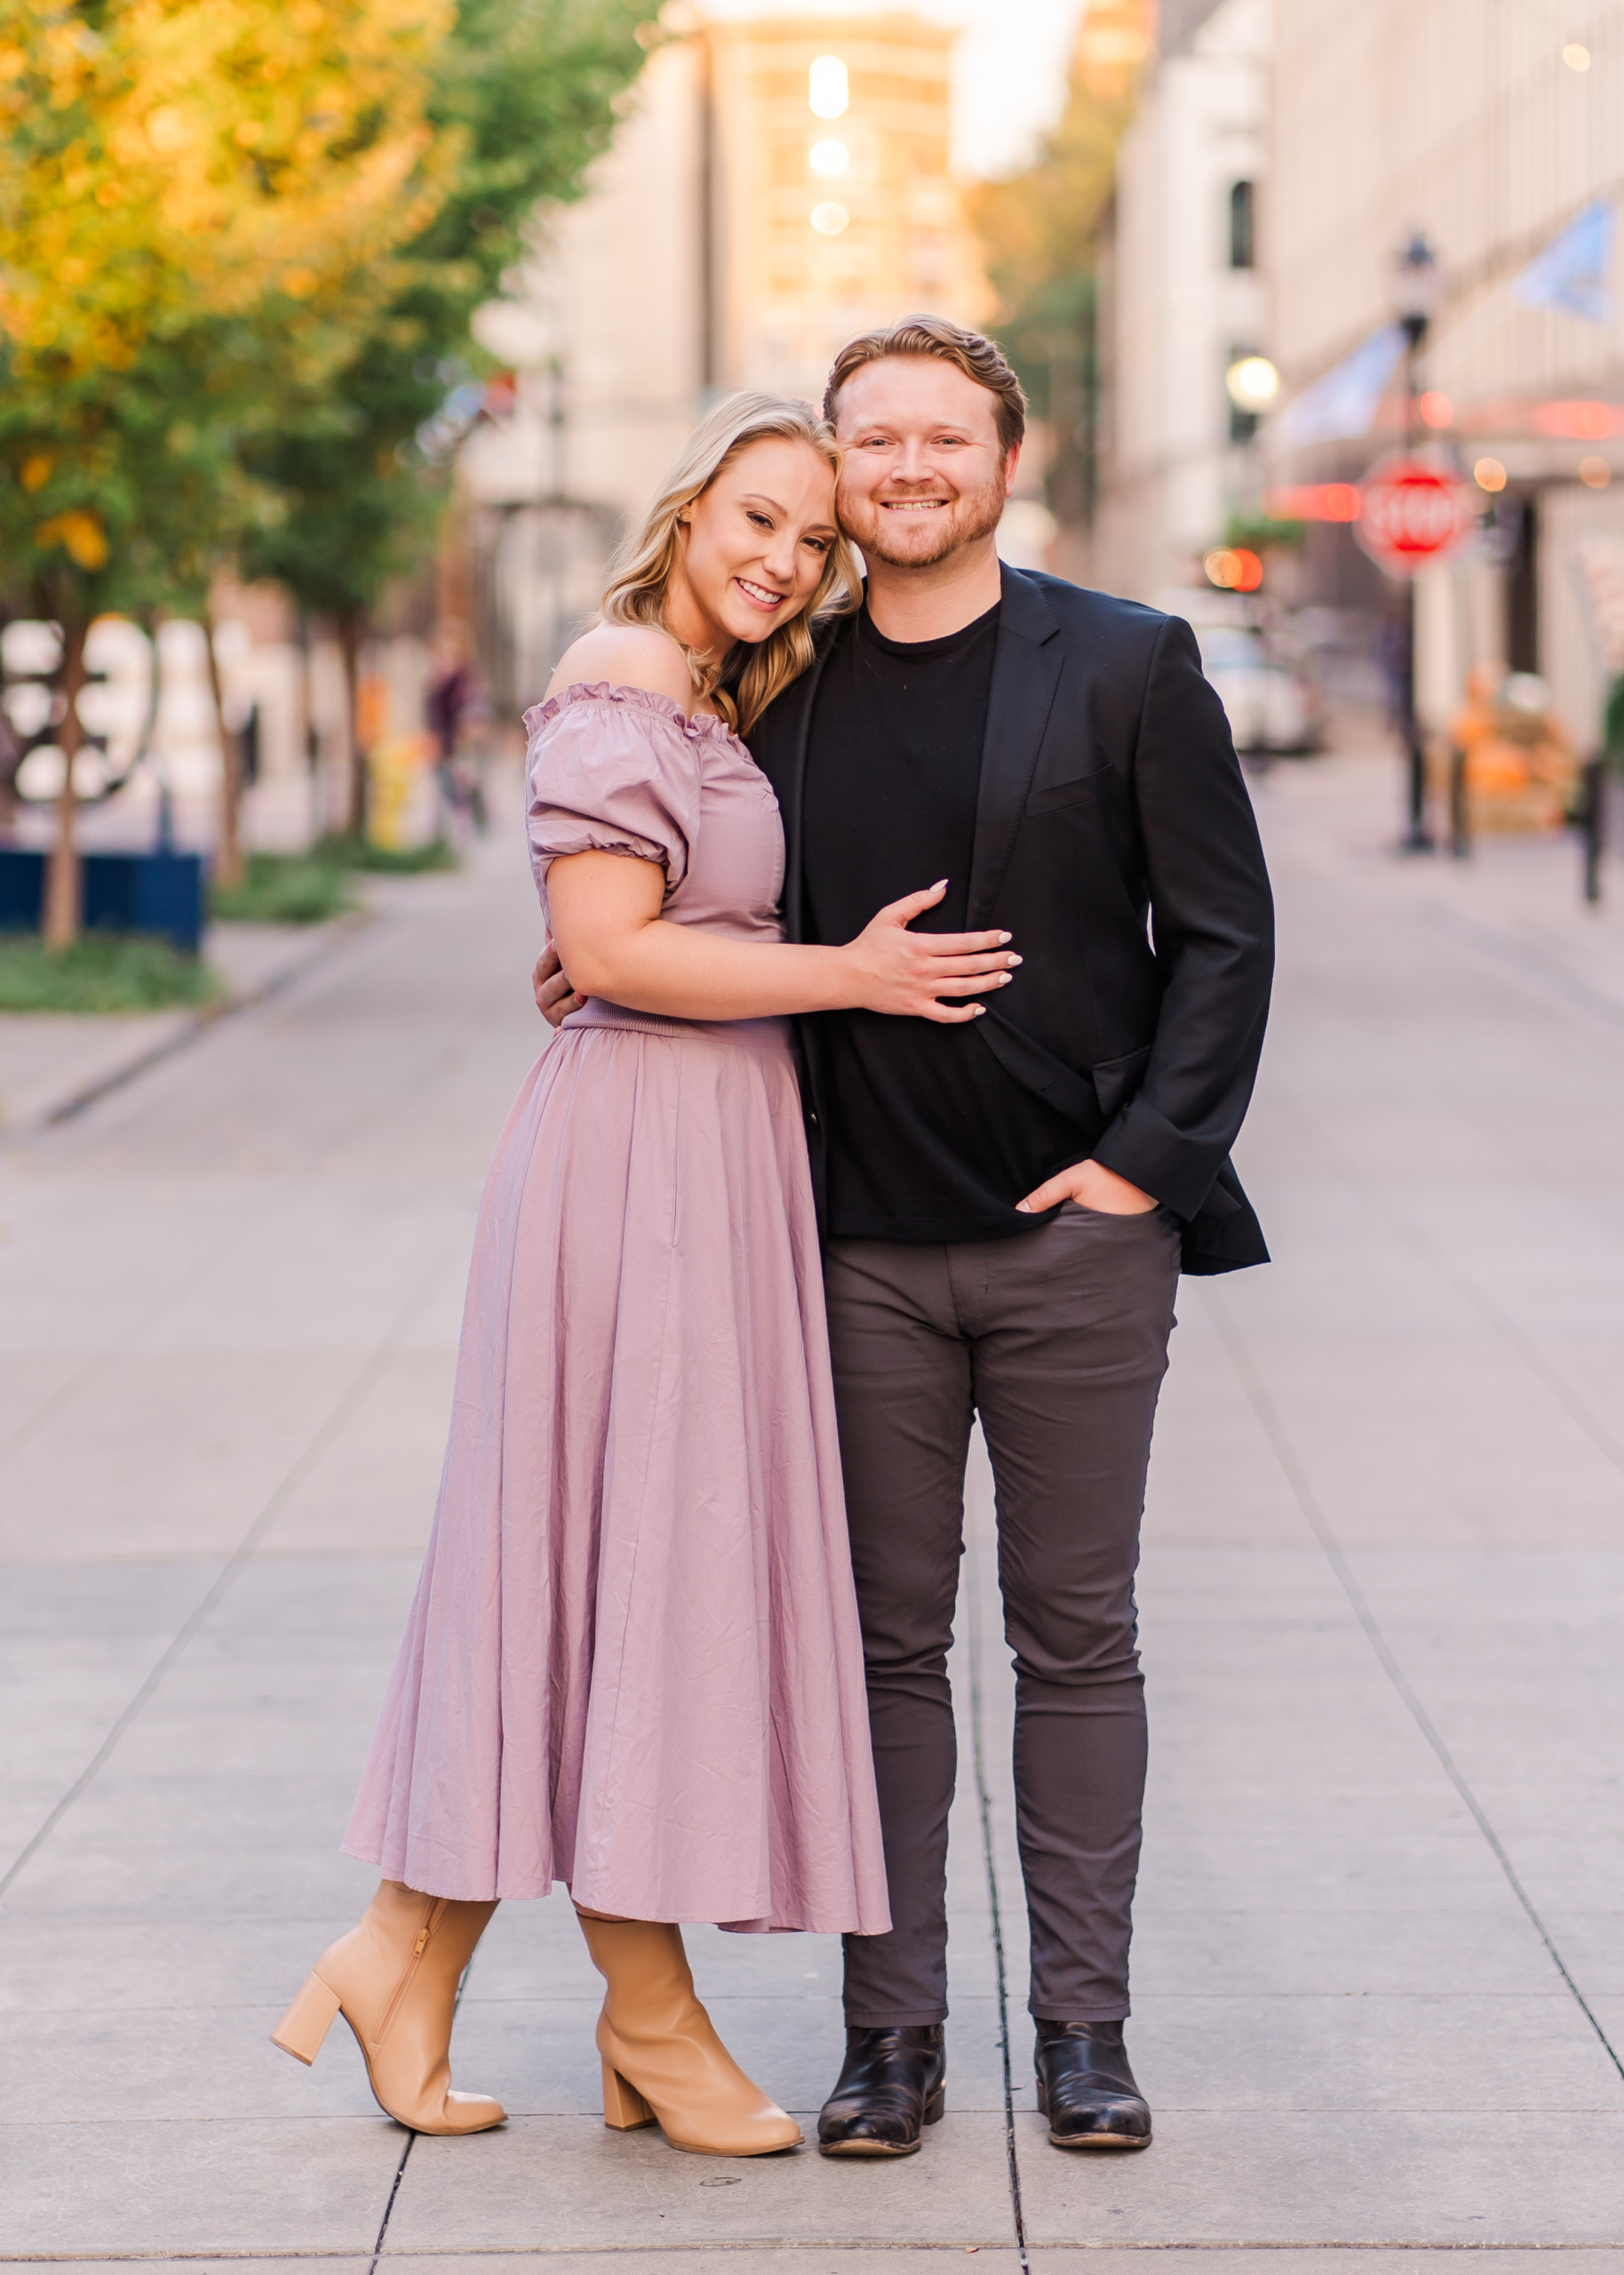 Downtown Chattanooga Engagement Shoot